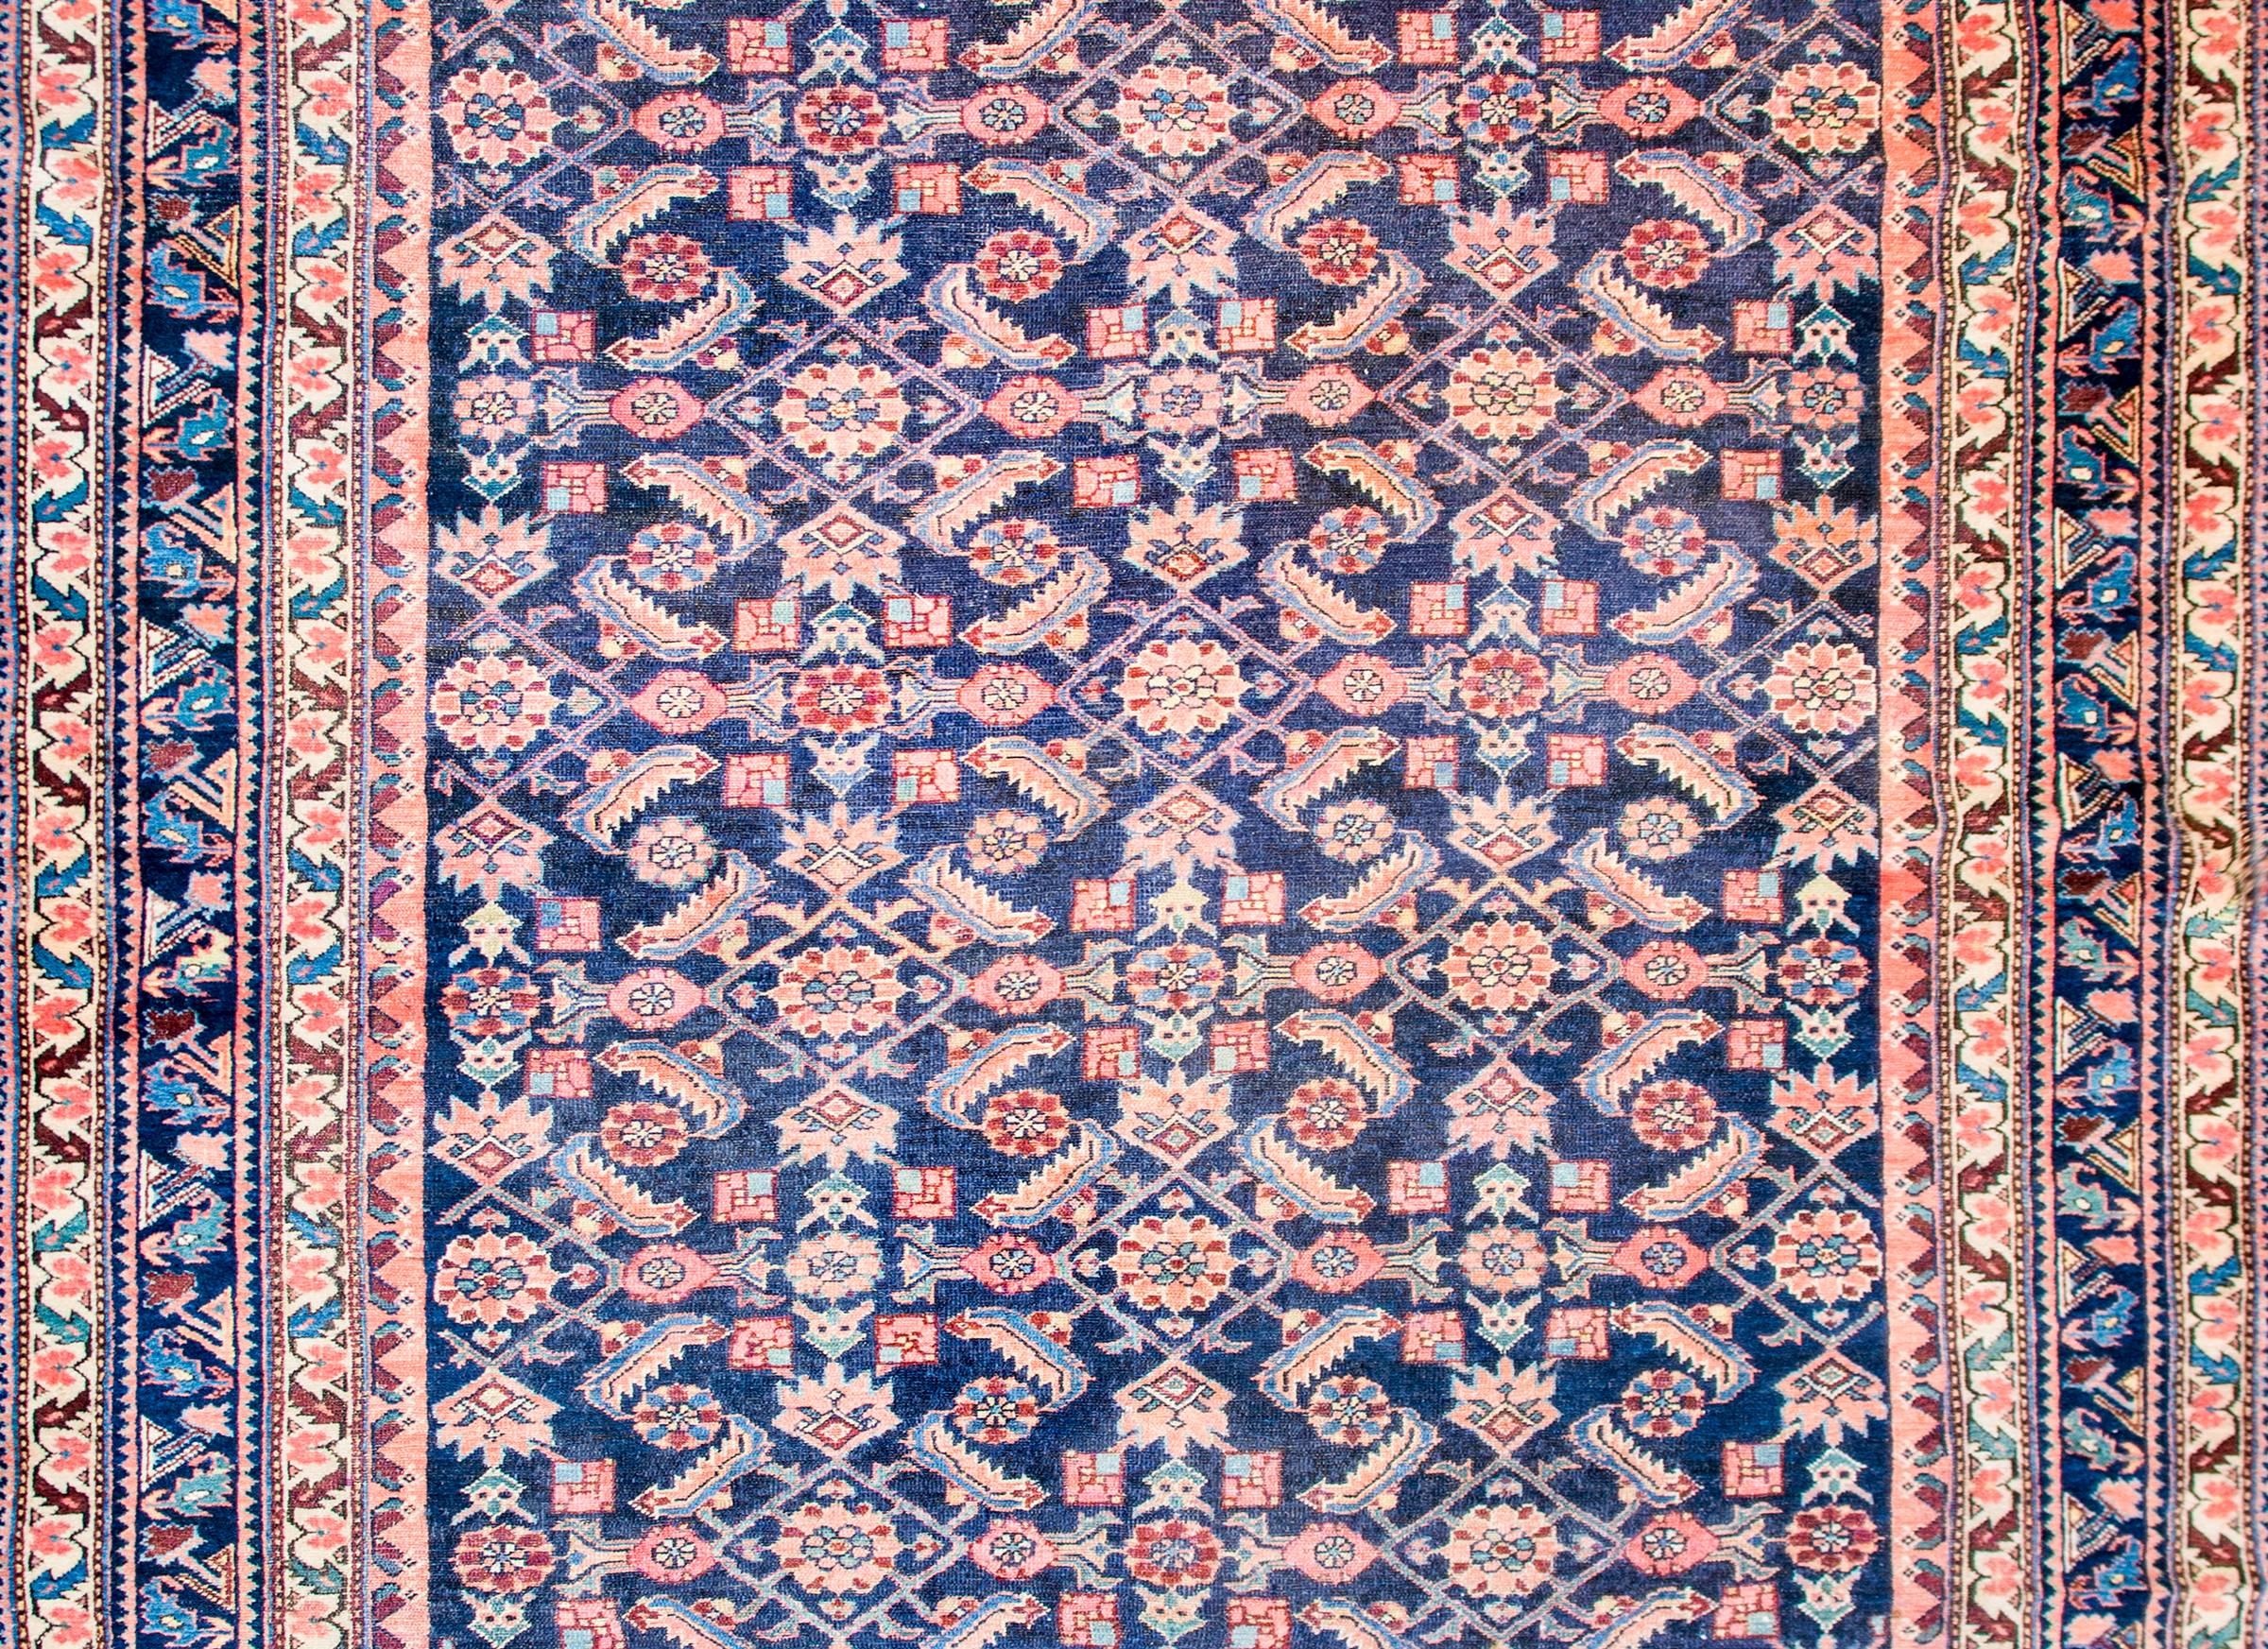 An amazing late 19th century Persian Malayer rug with an all-over trellised floral, leaf, and vine pattern woven in light and dark indigo, crimson, pink, and cream colored wool, on a dark indigo background. The border is composed with one central